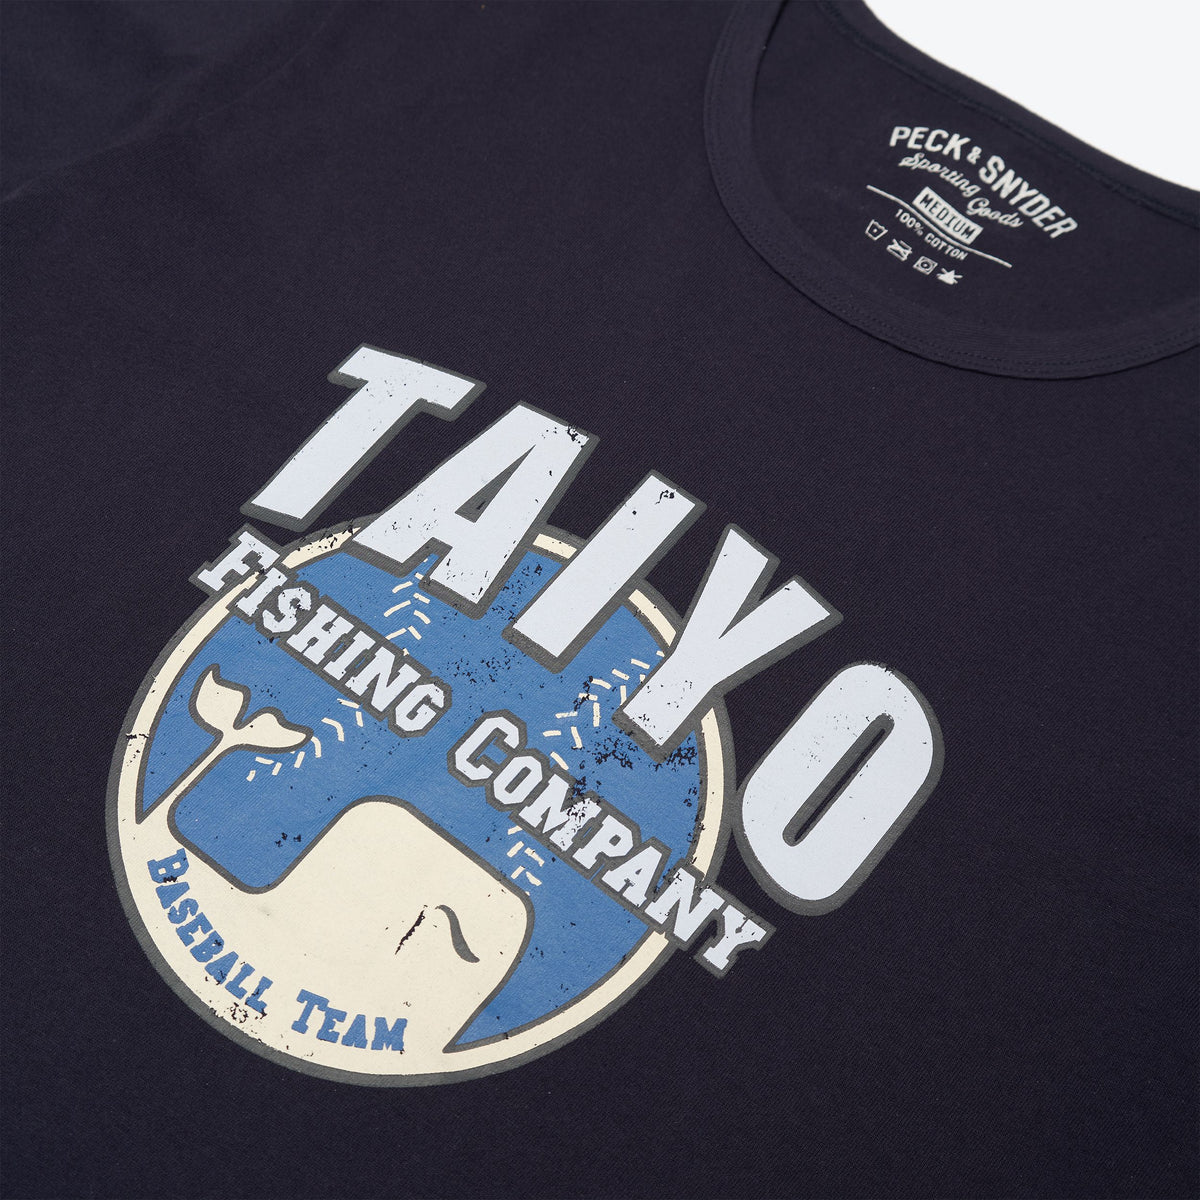 Peck & Snyder Taiyo Fishing Company Tee - Navy - The Great Divide